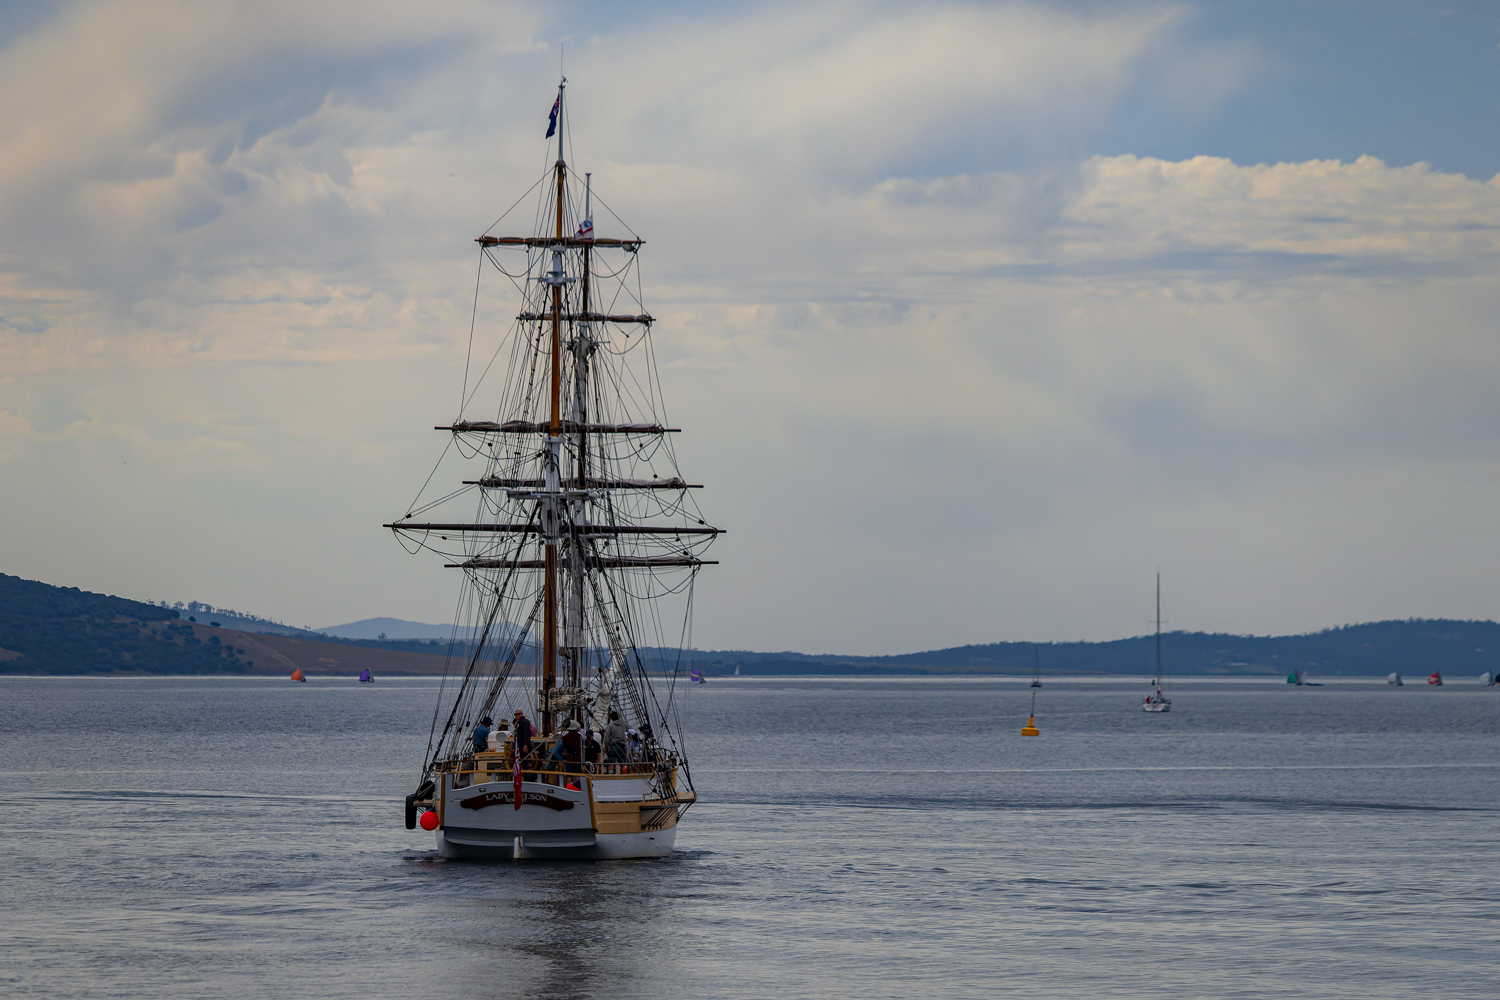 A tall ship, the Lady Nelson, sailing down the river